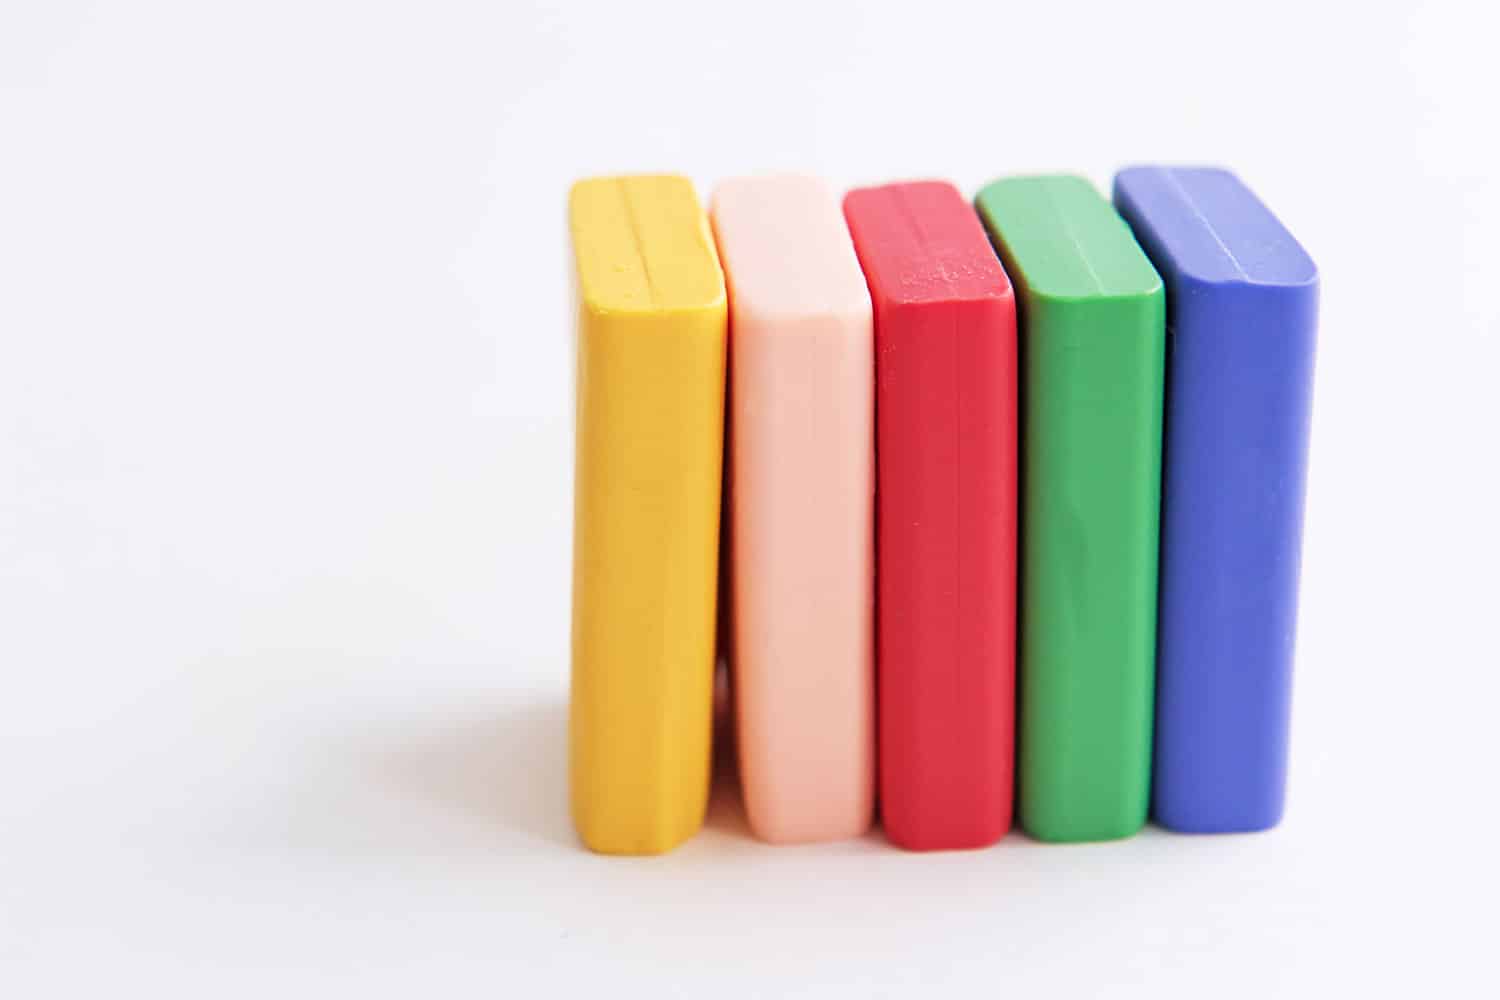 Different color blocks of polymer clay